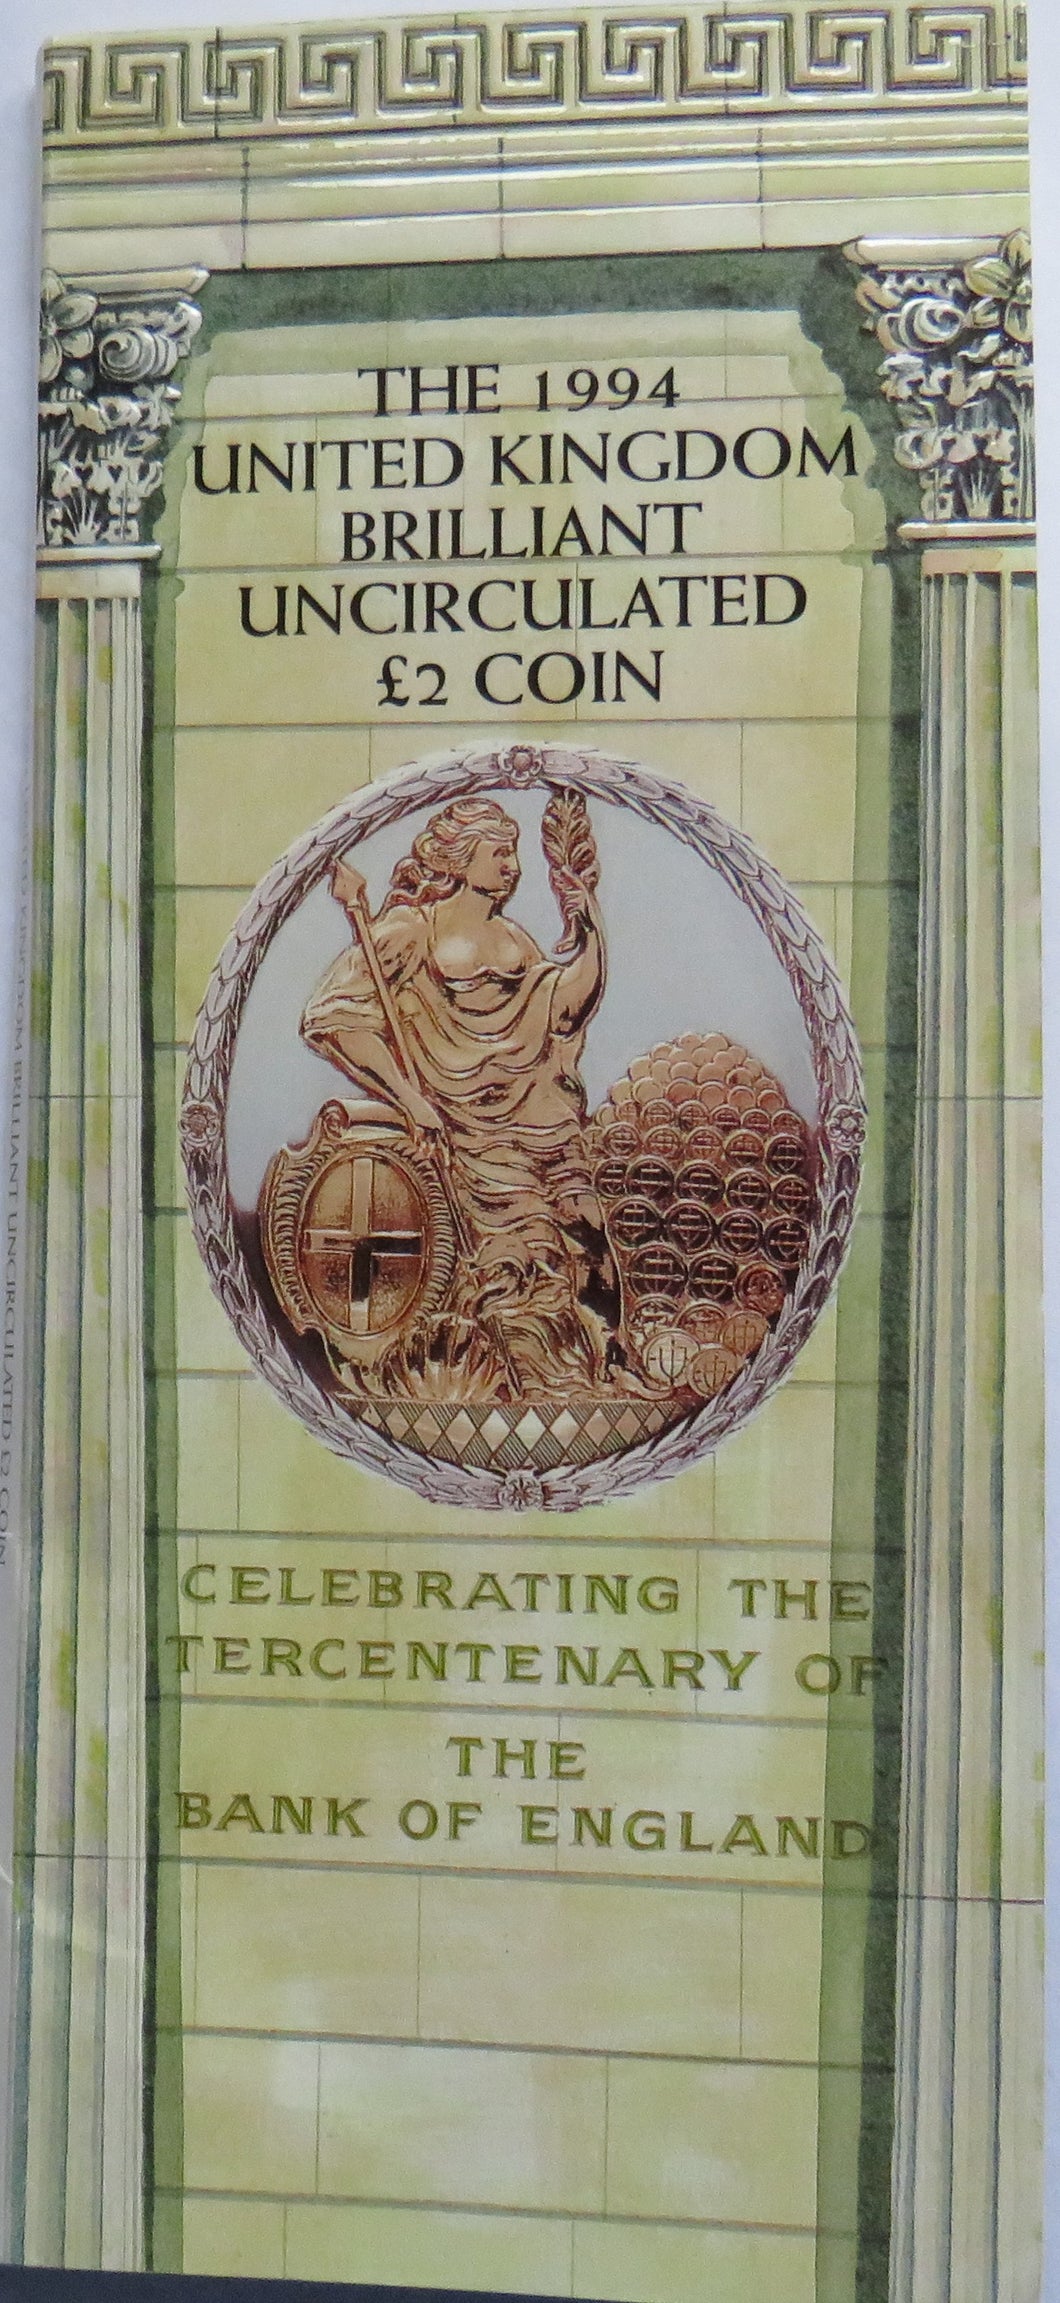 1994 United Kingdom Brilliant Uncirculated £2 Coin Bank of England